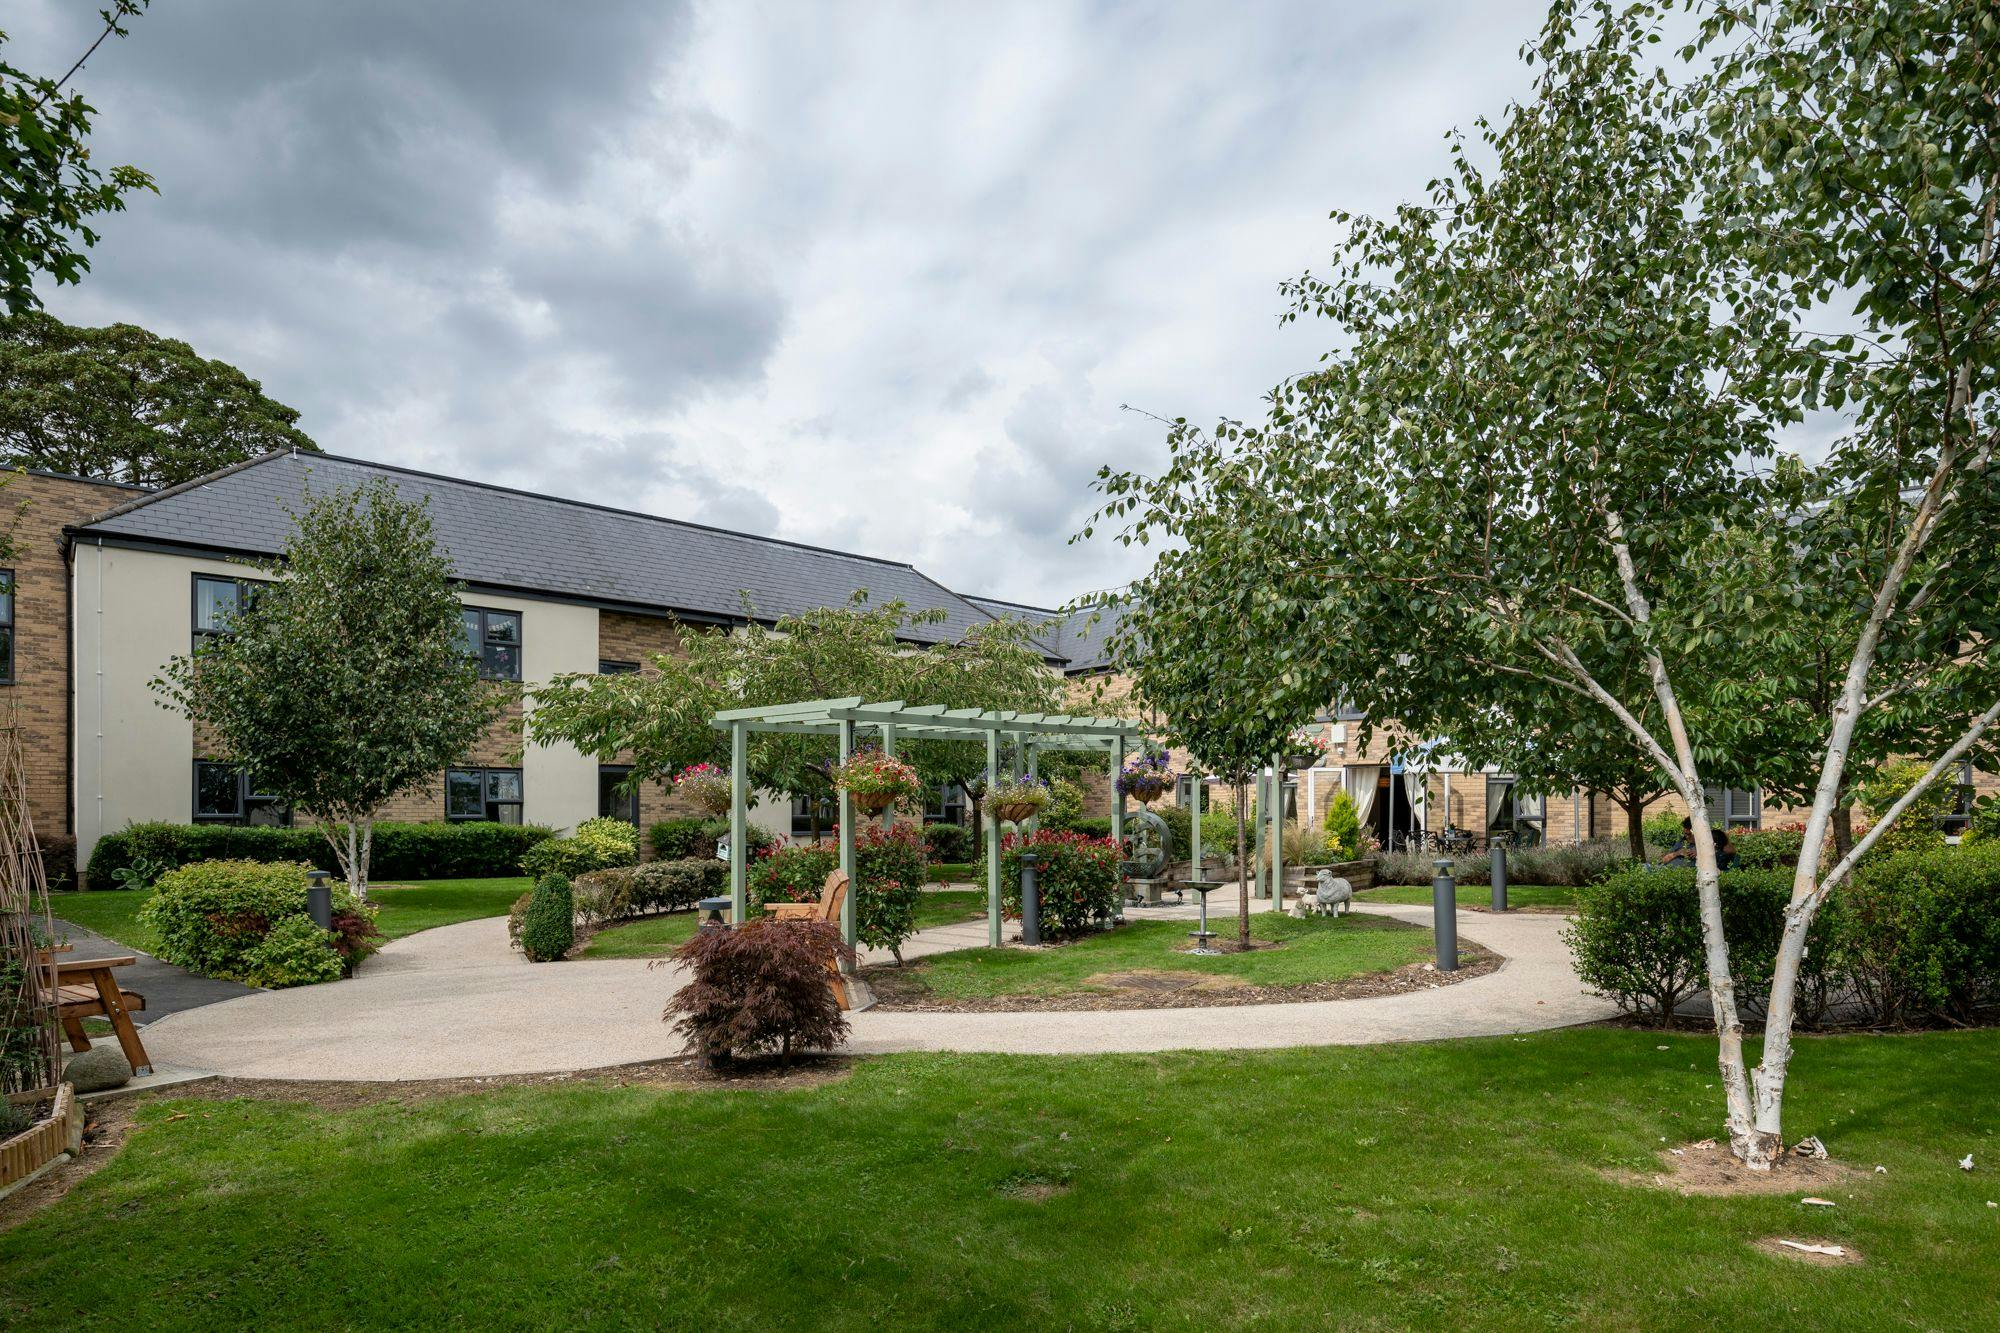 Garden at Goodson Lodge in Care Home in Trowbridge, Wiltshire